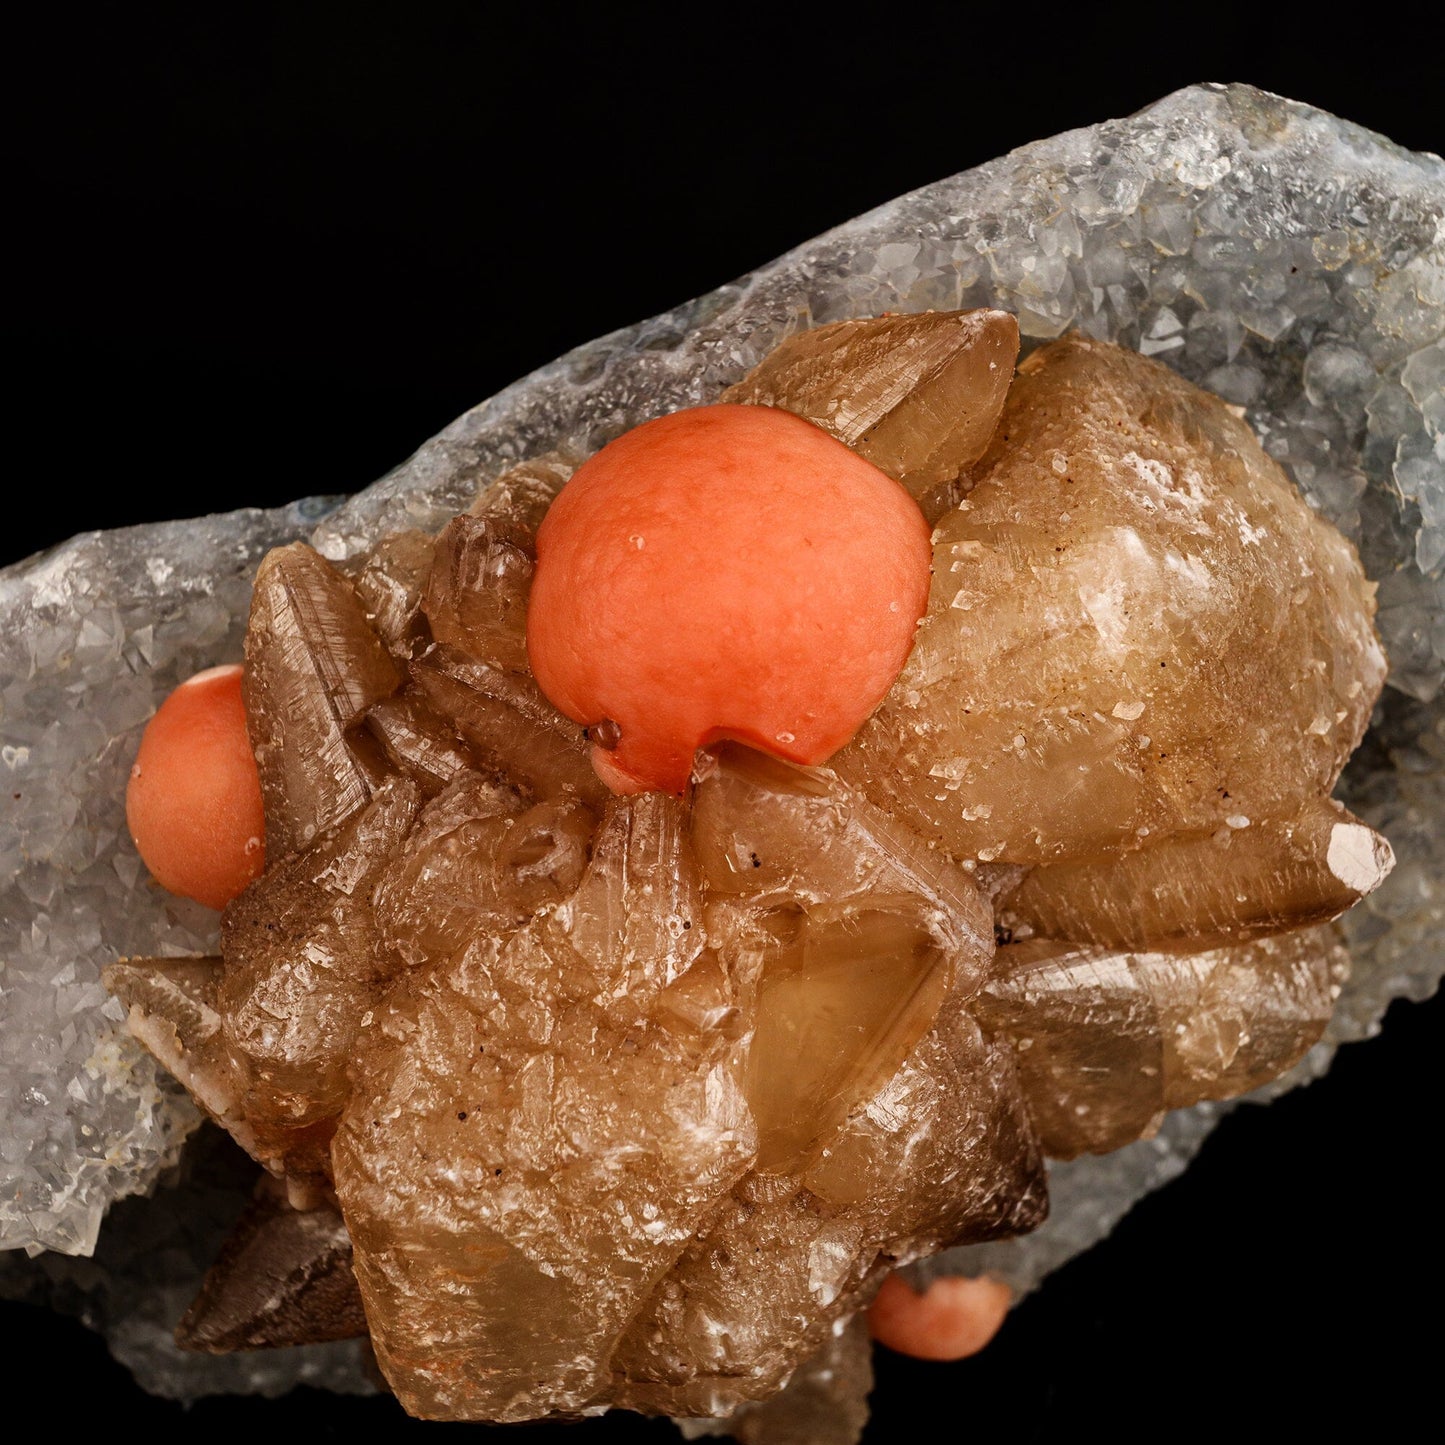 Huge Red Botryoidal Fluorite Ball on Calcite Very Rare Natural Mineral Specimen # B-TUC 6667 Fluorite Superb Minerals 